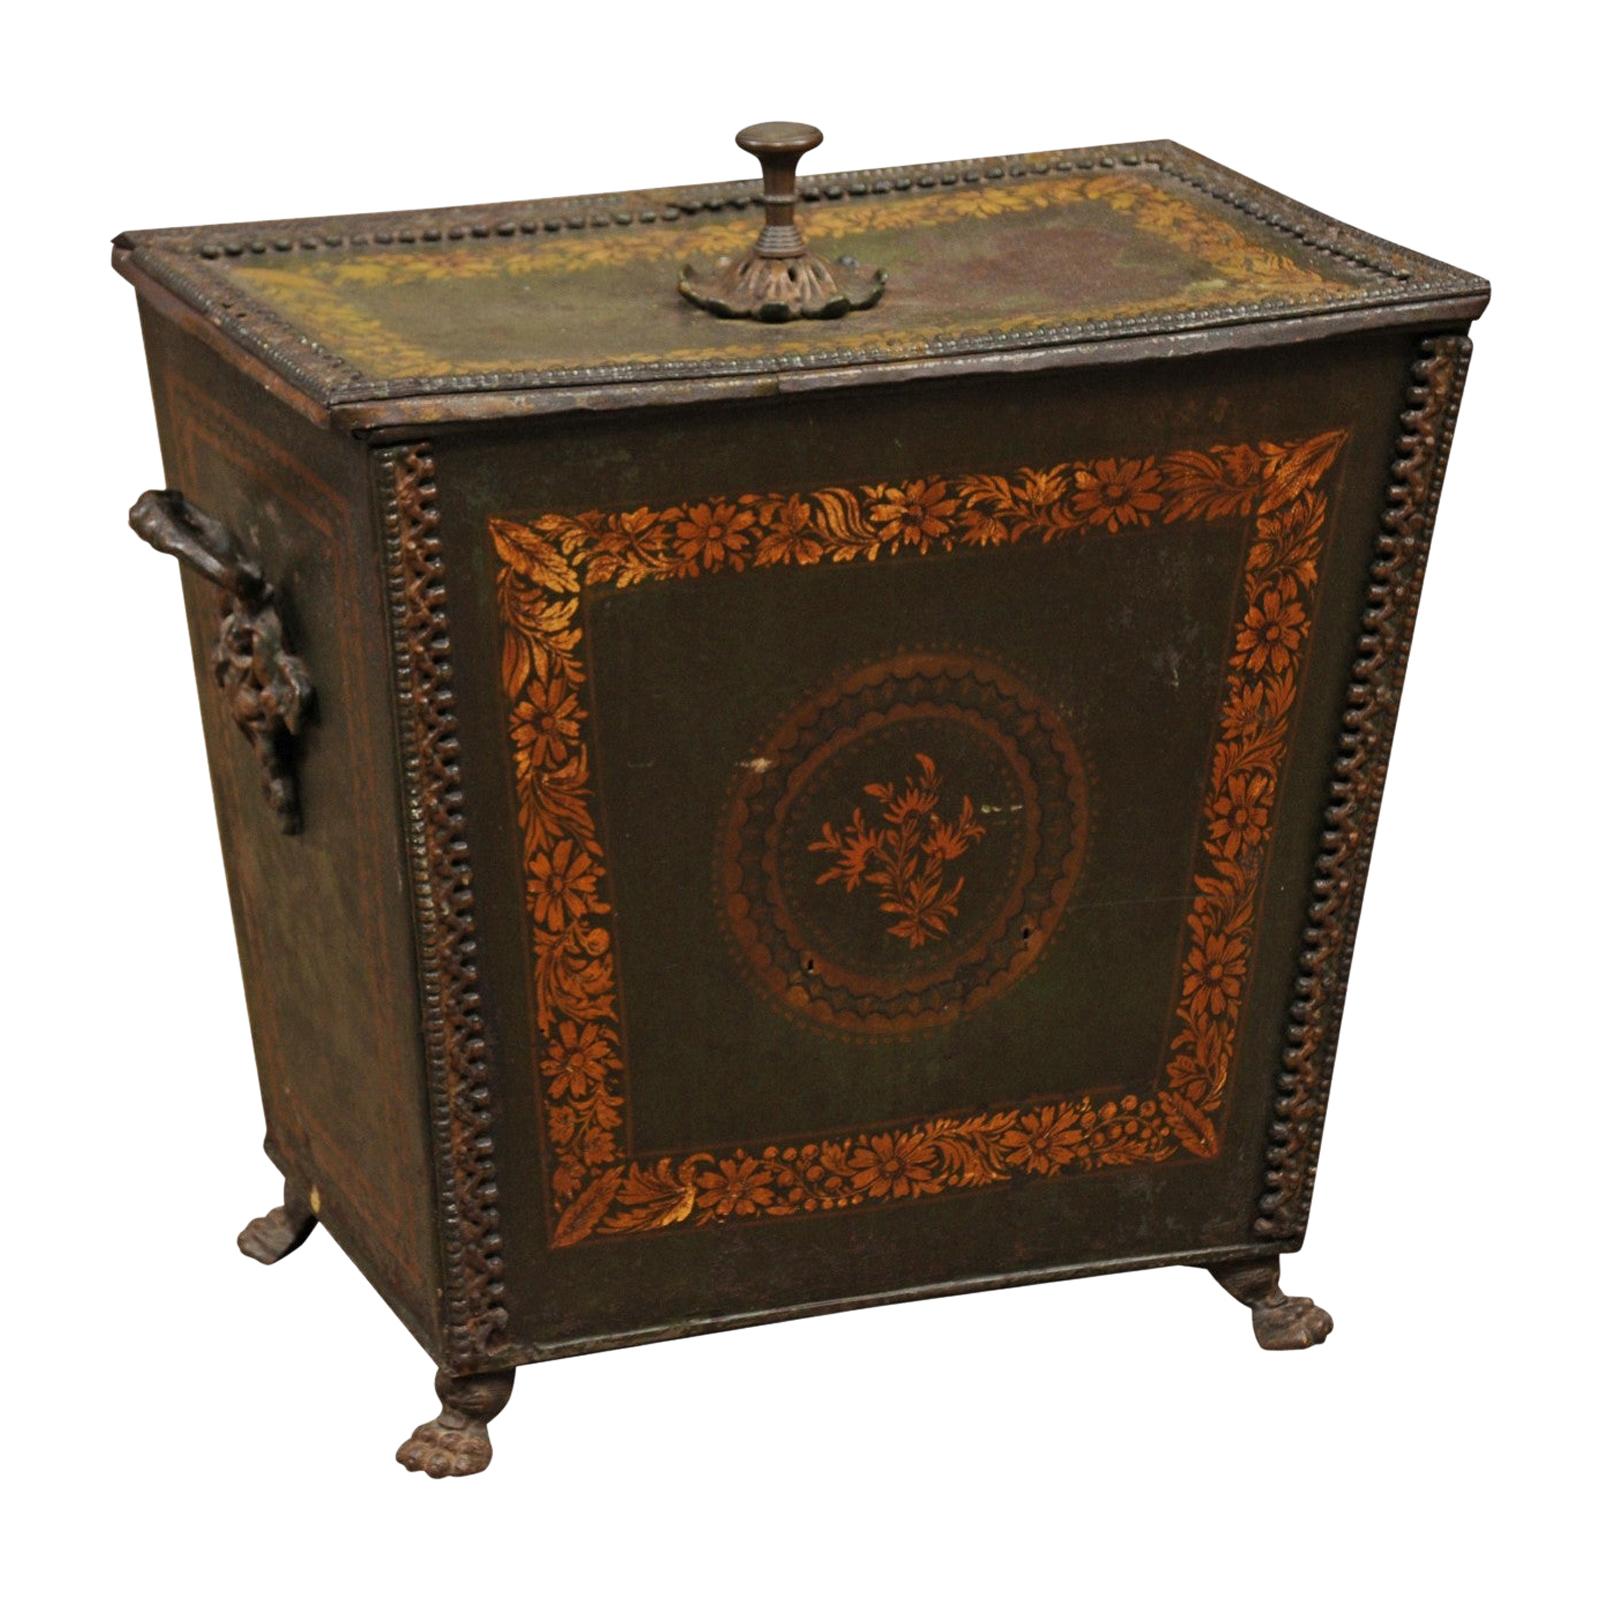 19th Century Regency Style Green Painted Coal Hod with Gilt Decoration